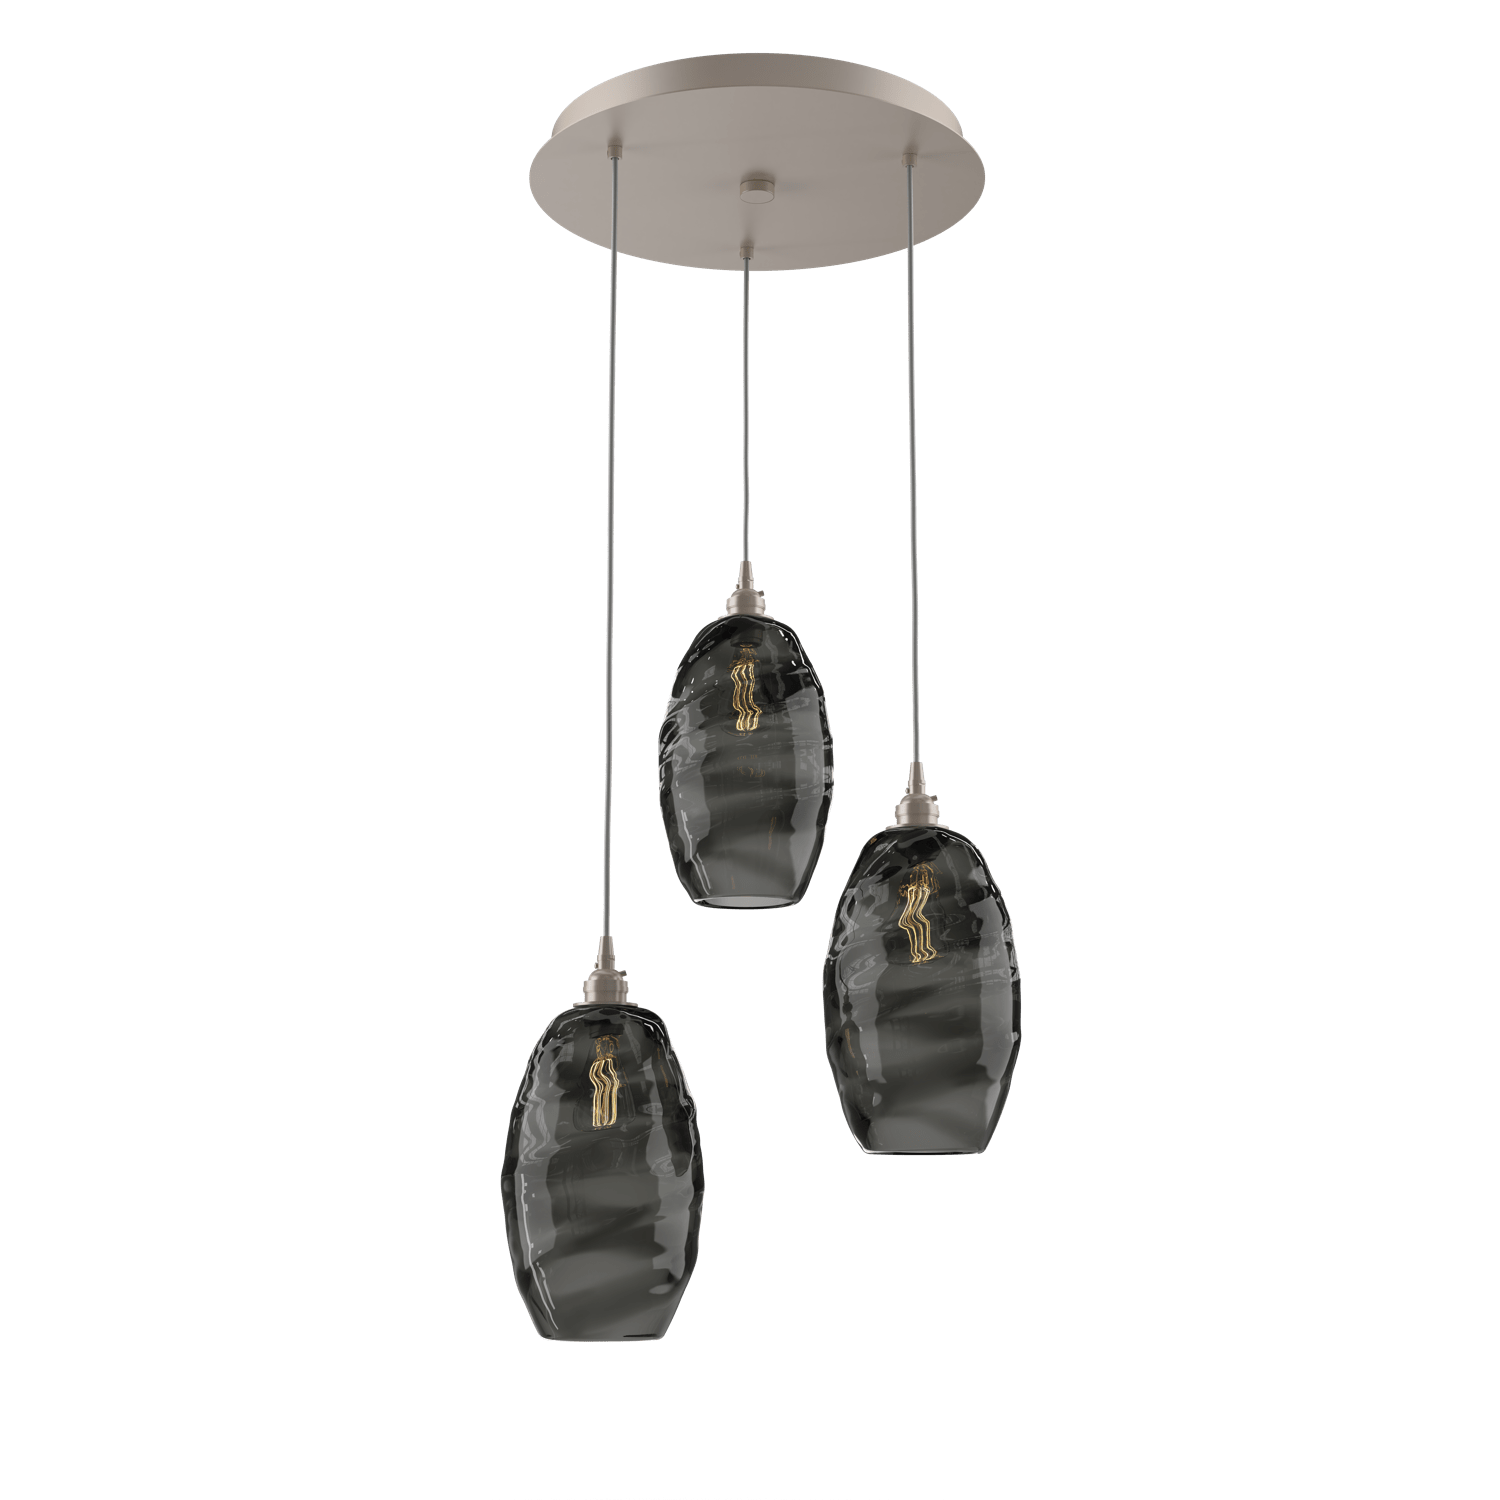 CHB0035-03-BS-OS-Hammerton-Studio-Optic-Blown-Glass-Elisse-3-light-round-pendant-chandelier-with-metallic-beige-silver-finish-and-optic-smoke-blown-glass-shades-and-incandescent-lamping